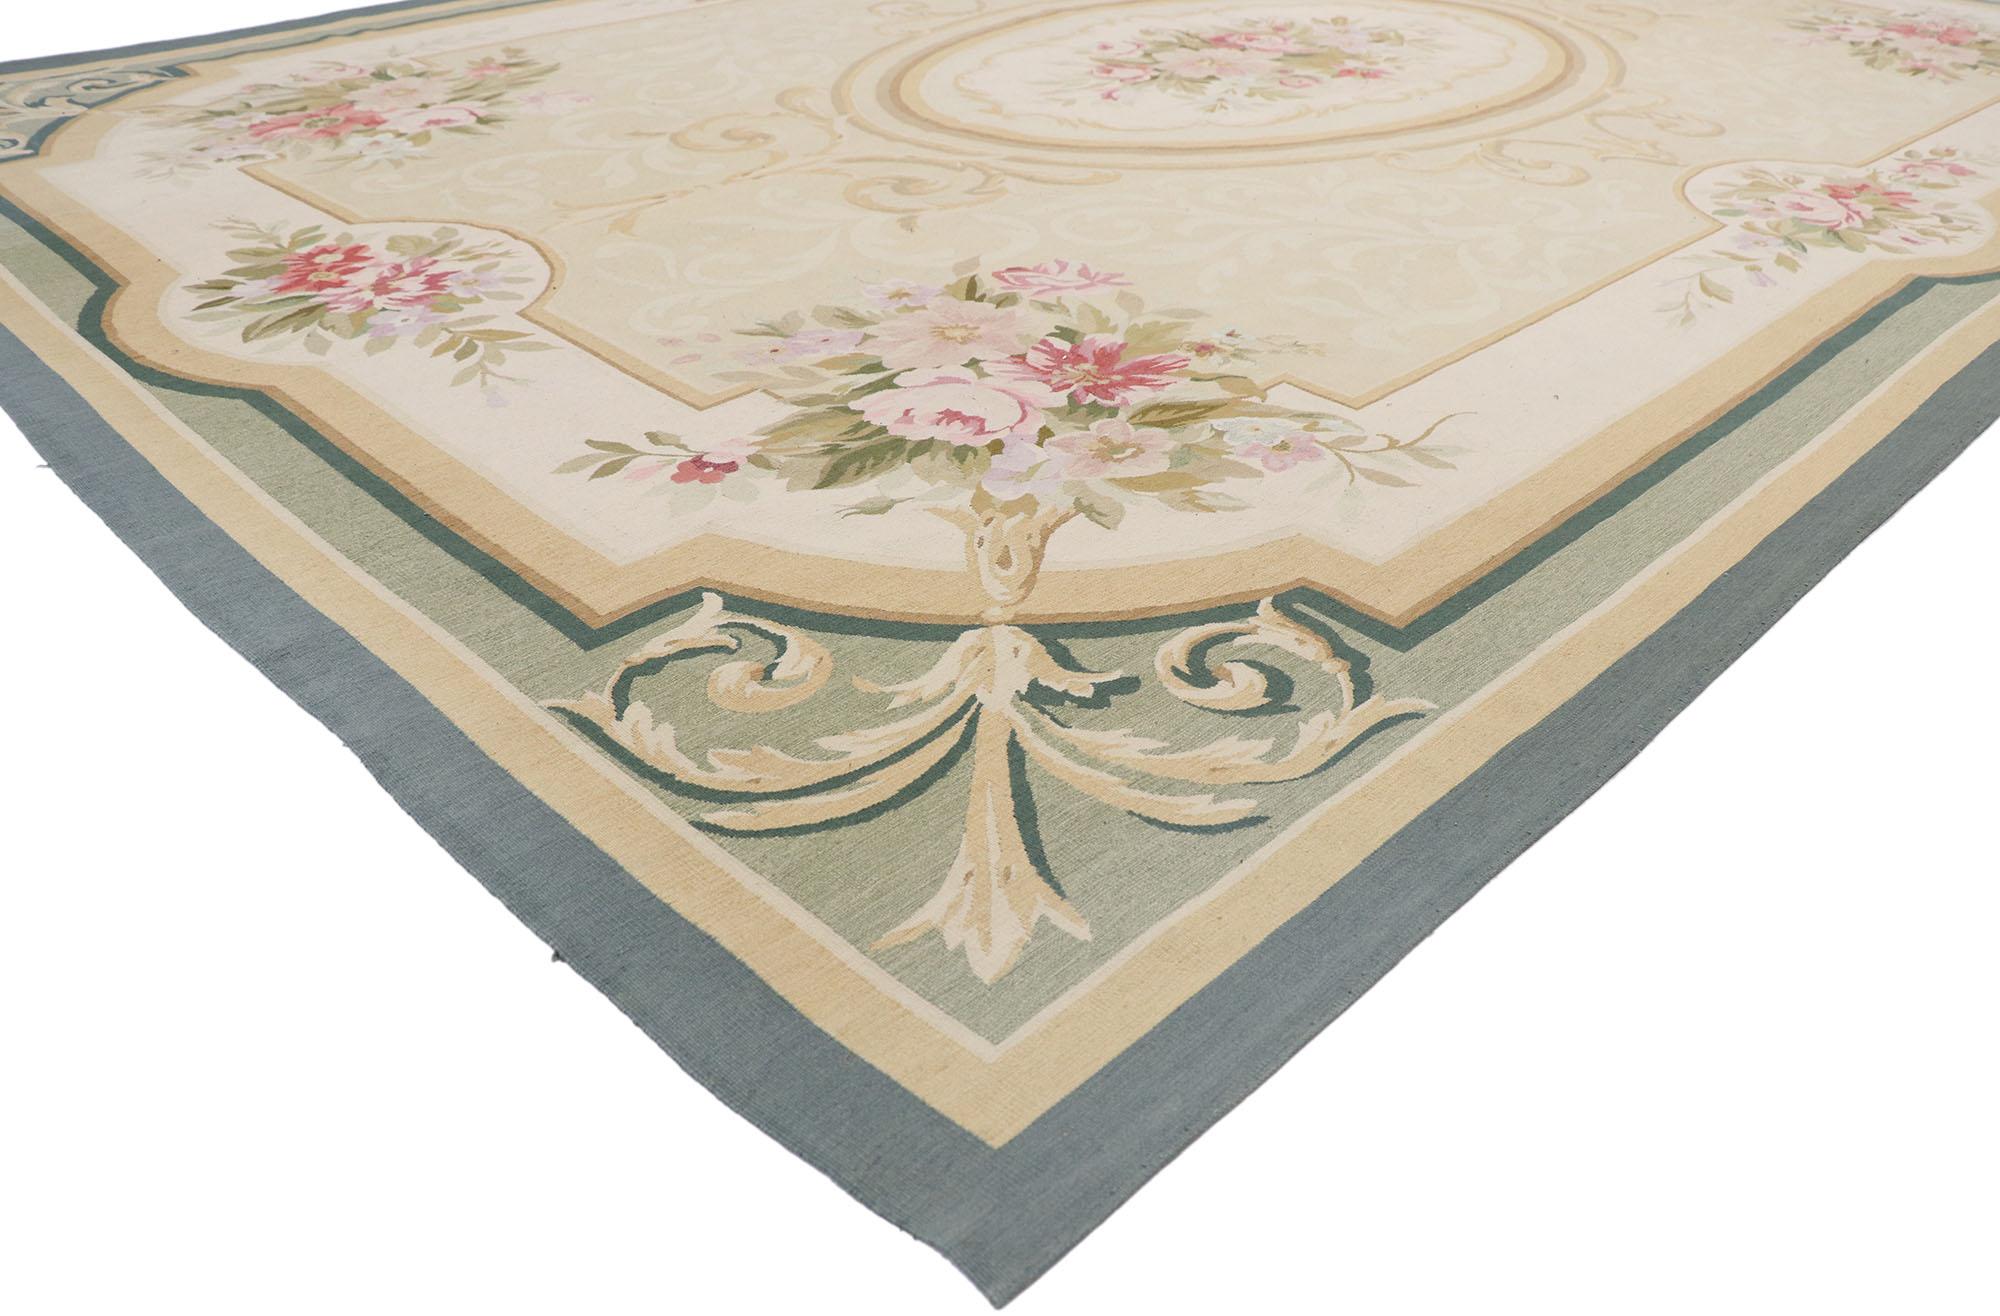 77610, vintage French Aubusson rug with Regal Romantic Rococo style. Flourishing in technique and trend from the middle of the 17th century for nearly two hundred years, until the early 20th century, this hand-woven wool vintage French Aubusson rug